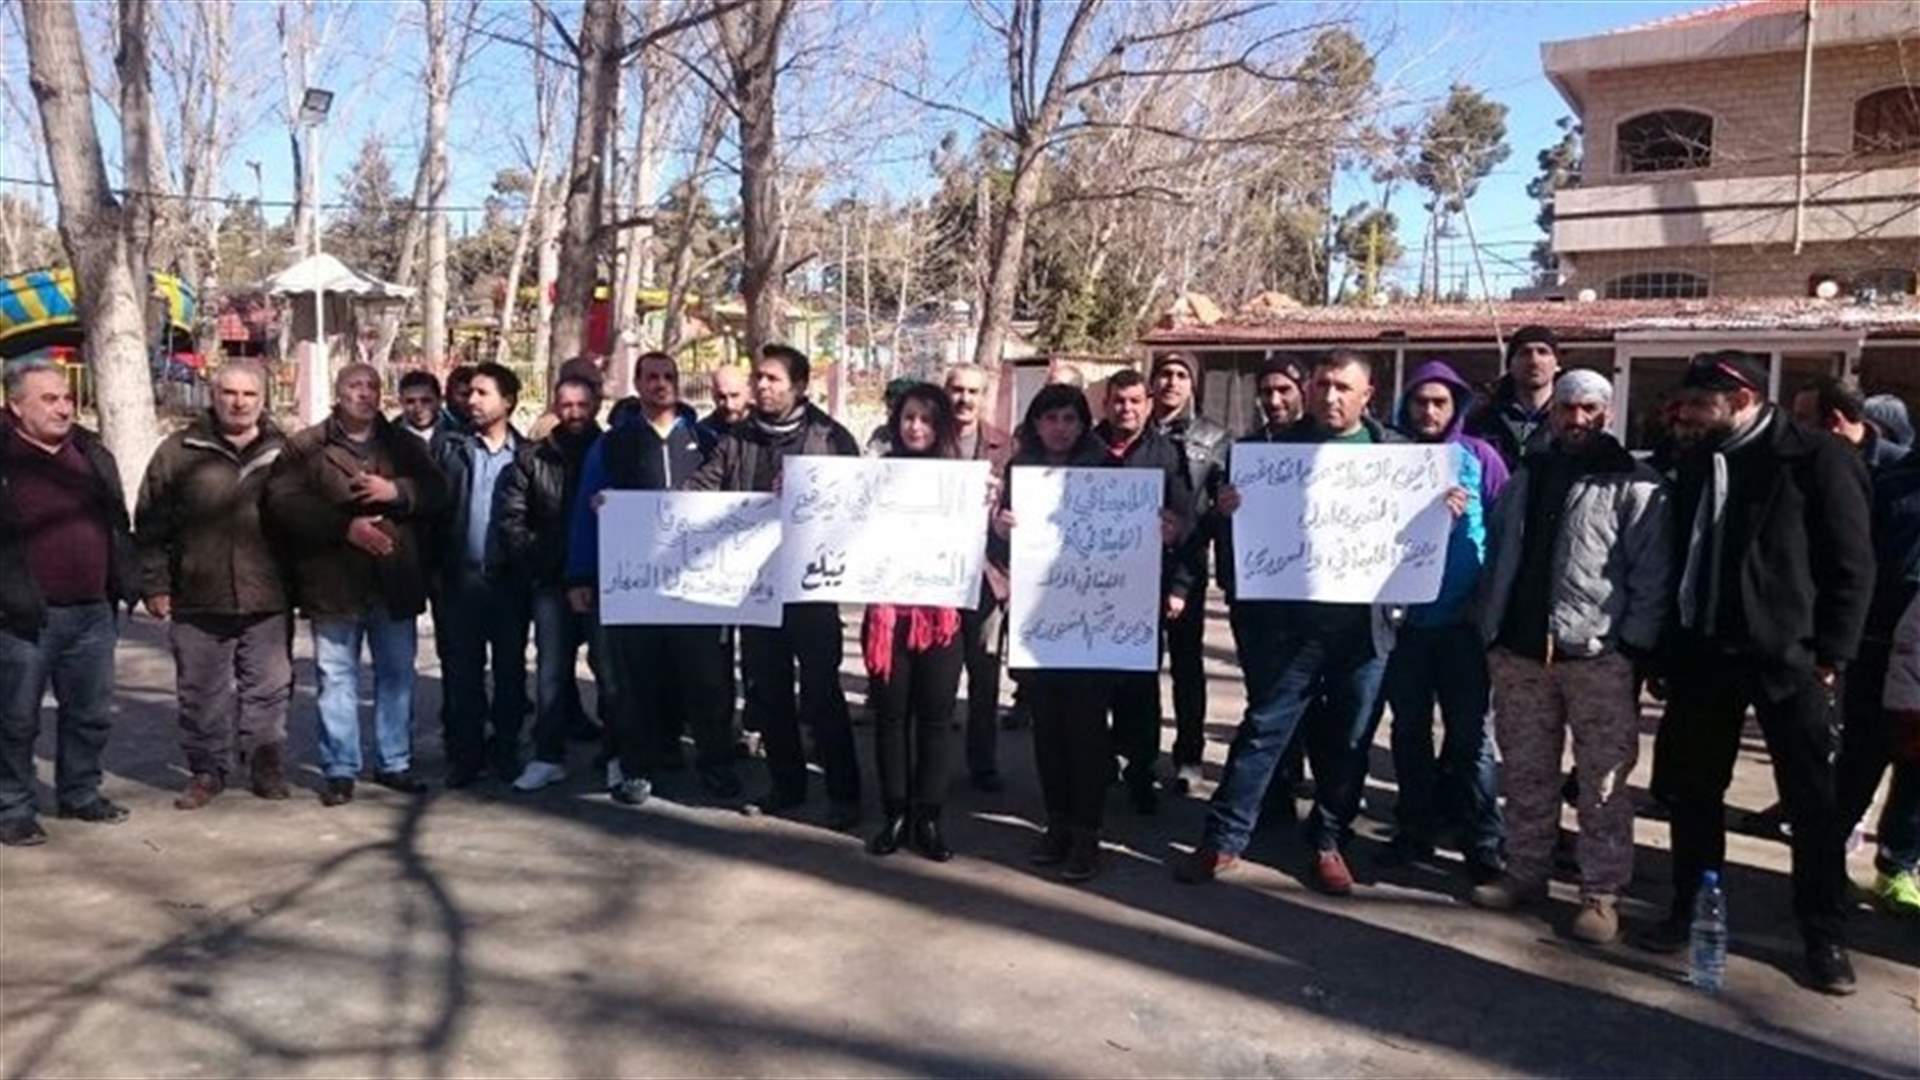 Workers in Baalbeck protest against foreign competition